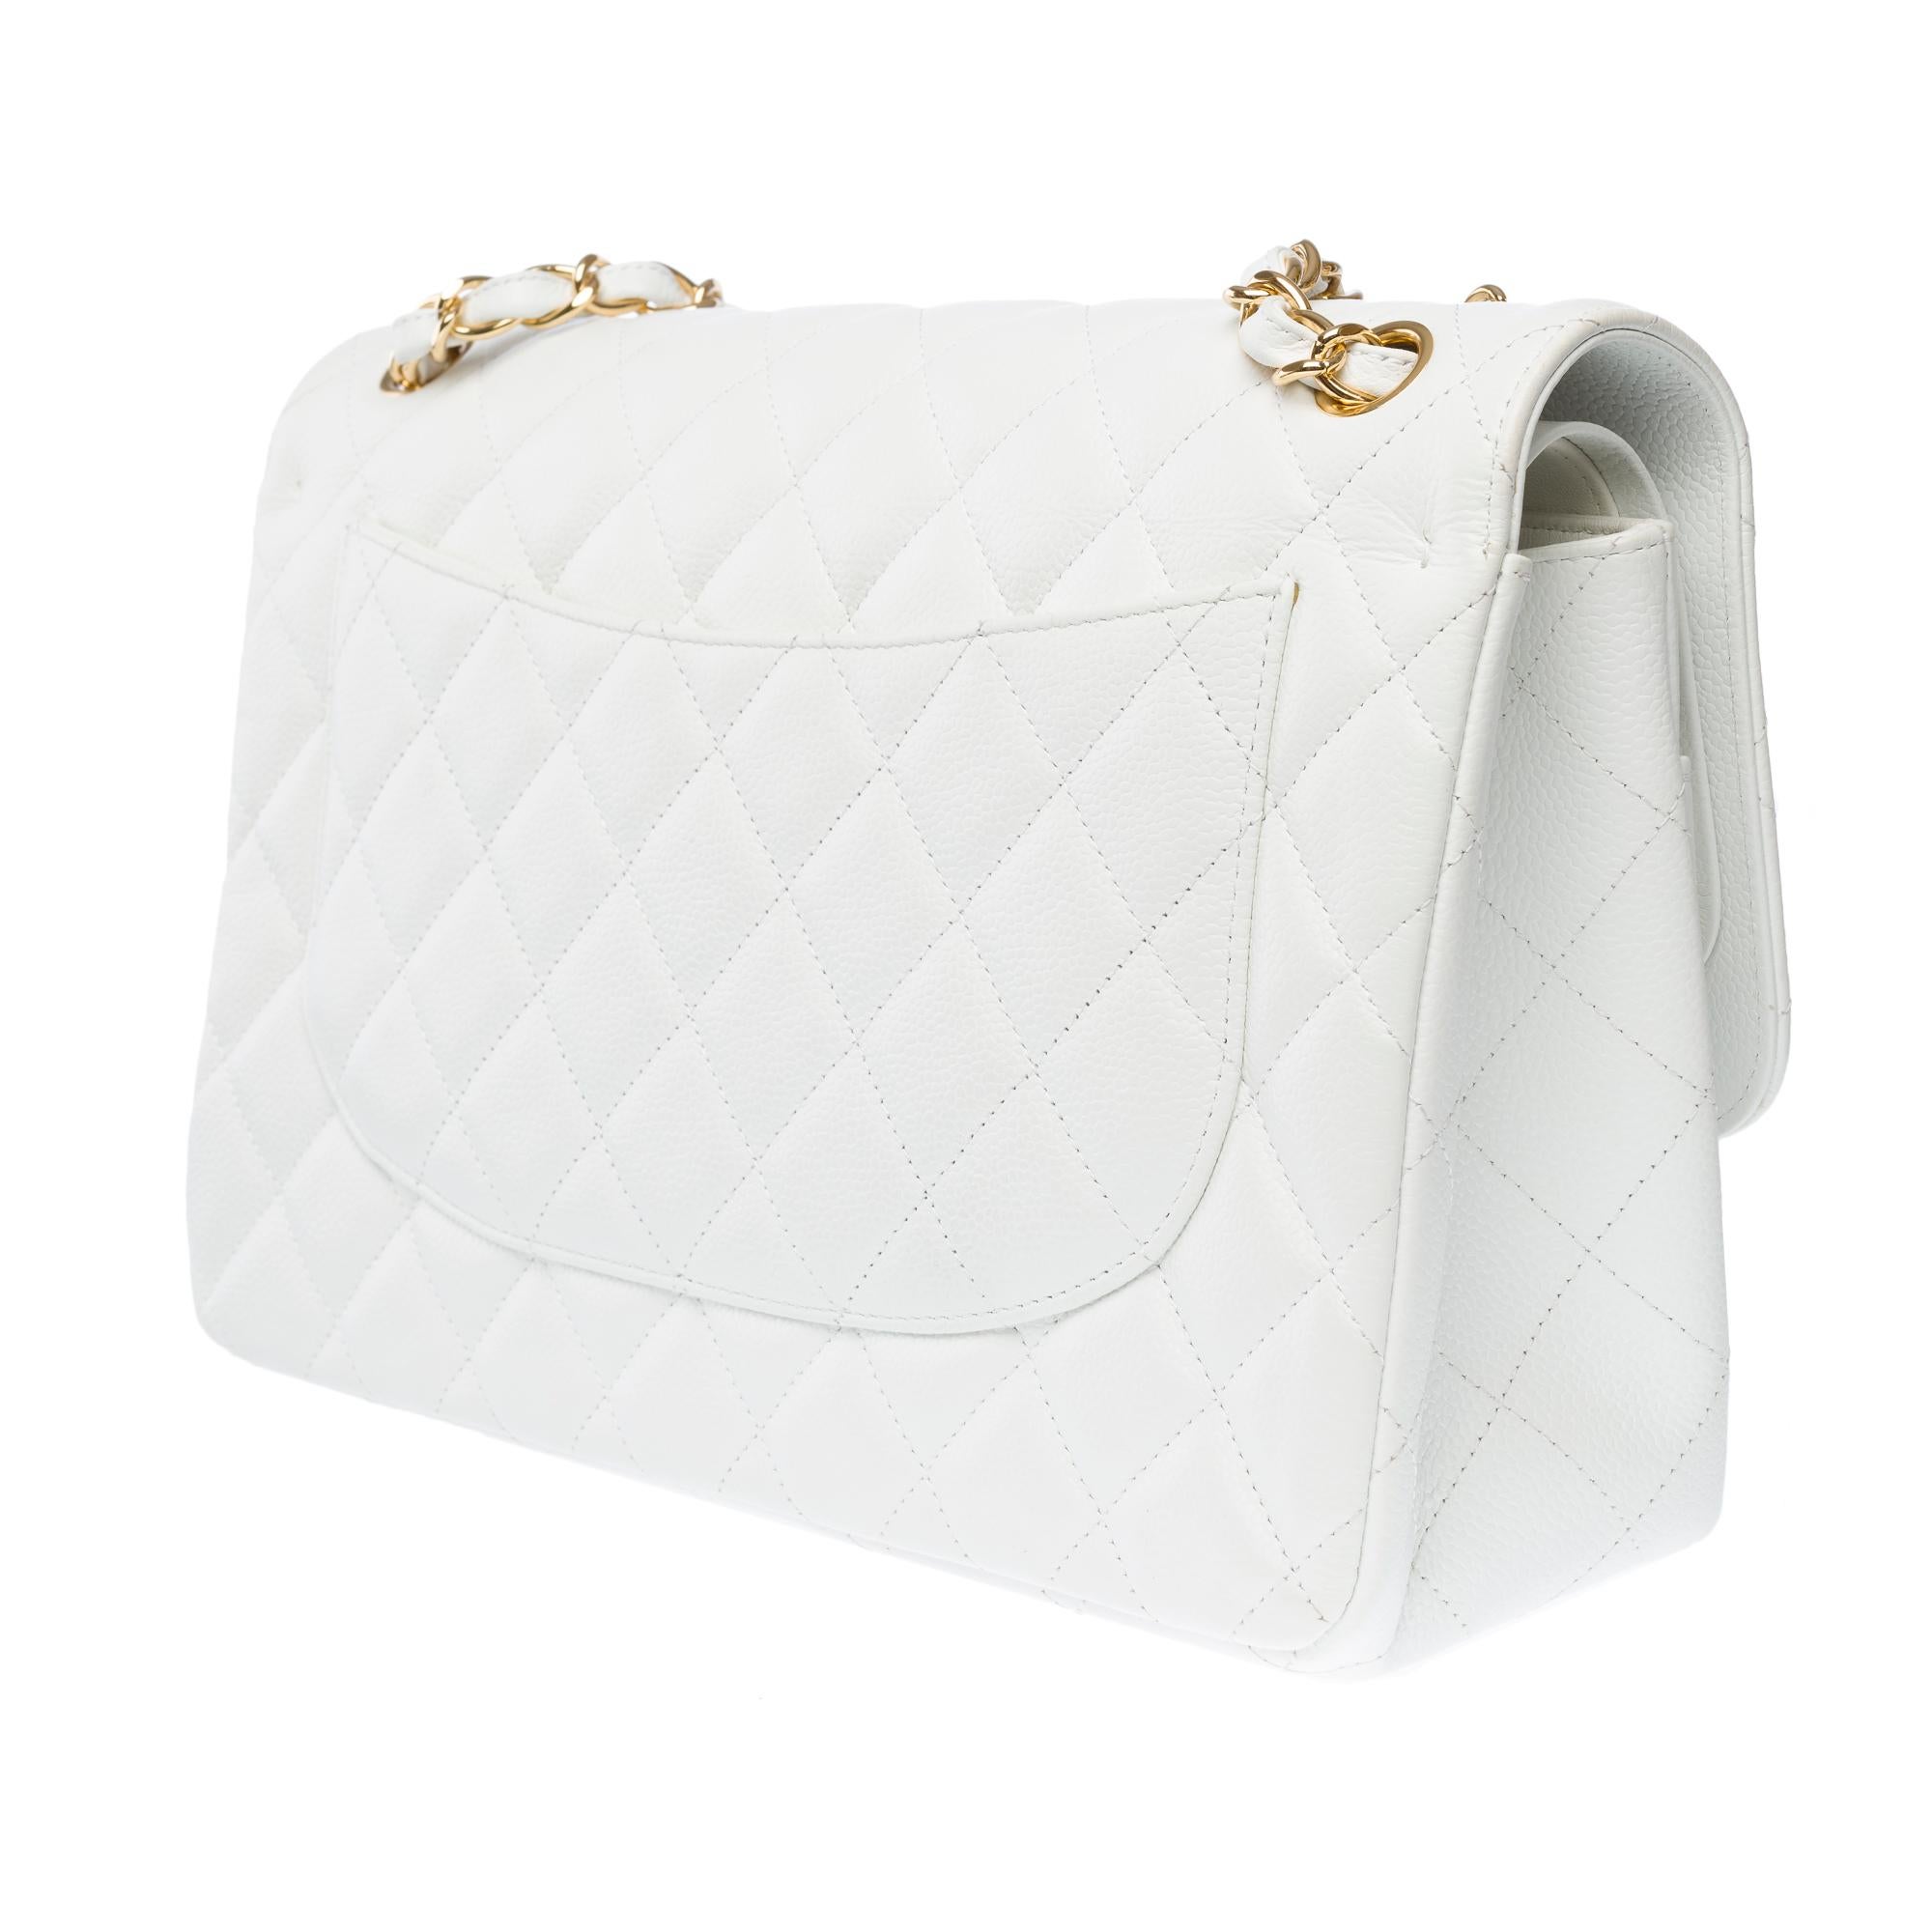 Chanel Timeless Jumbo double flap bag in White quilted Caviar leather, GHW For Sale 1